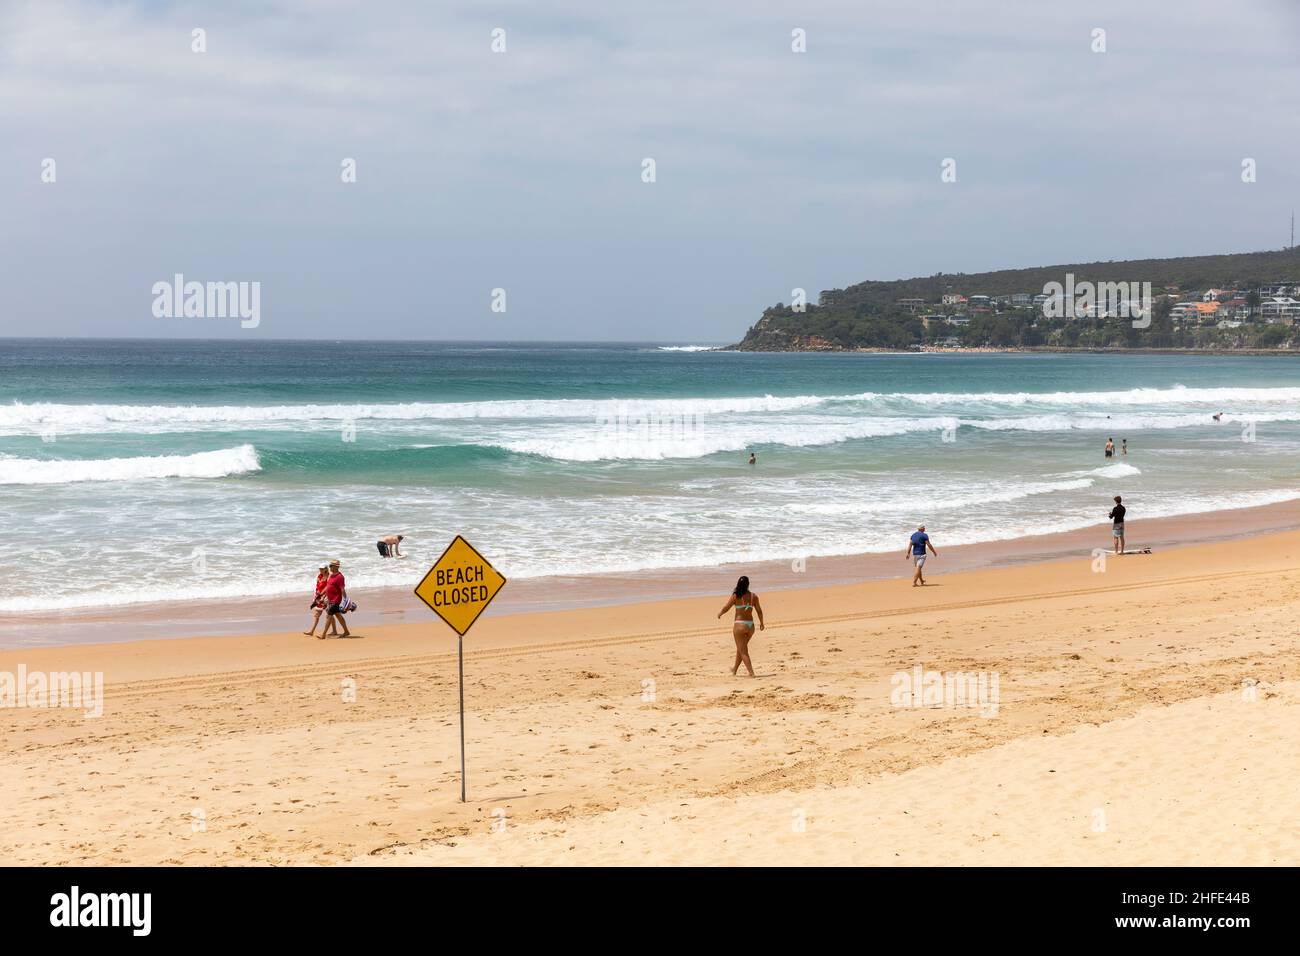 Manly Beach Sydney closed from tsunami warning, people ignore closure and attend the beach,Sydney,Australia Stock Photo